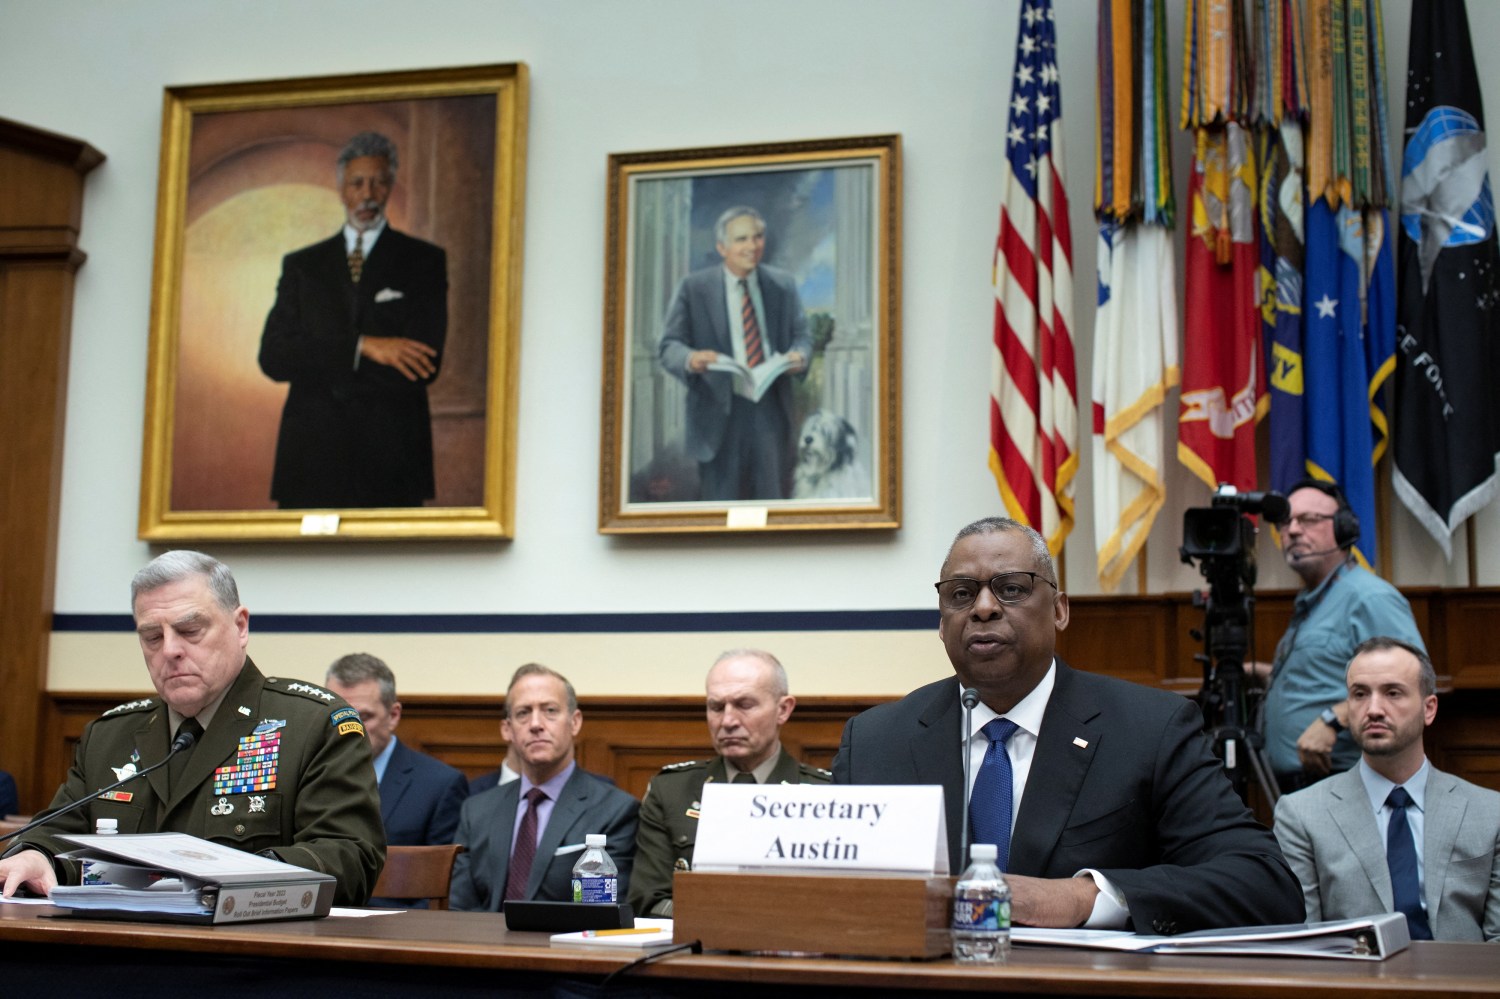 Joint Chiefs Chairman General Mark Milley and U.S. Defense Secretary Lloyd Austin testify before a House Armed Services Committee hearing on "Department of Defense's Budget Requests for FY2023”, at the U.S. Capitol in Washington, U.S., April 5, 2022. REUTERS/Tom Brenner